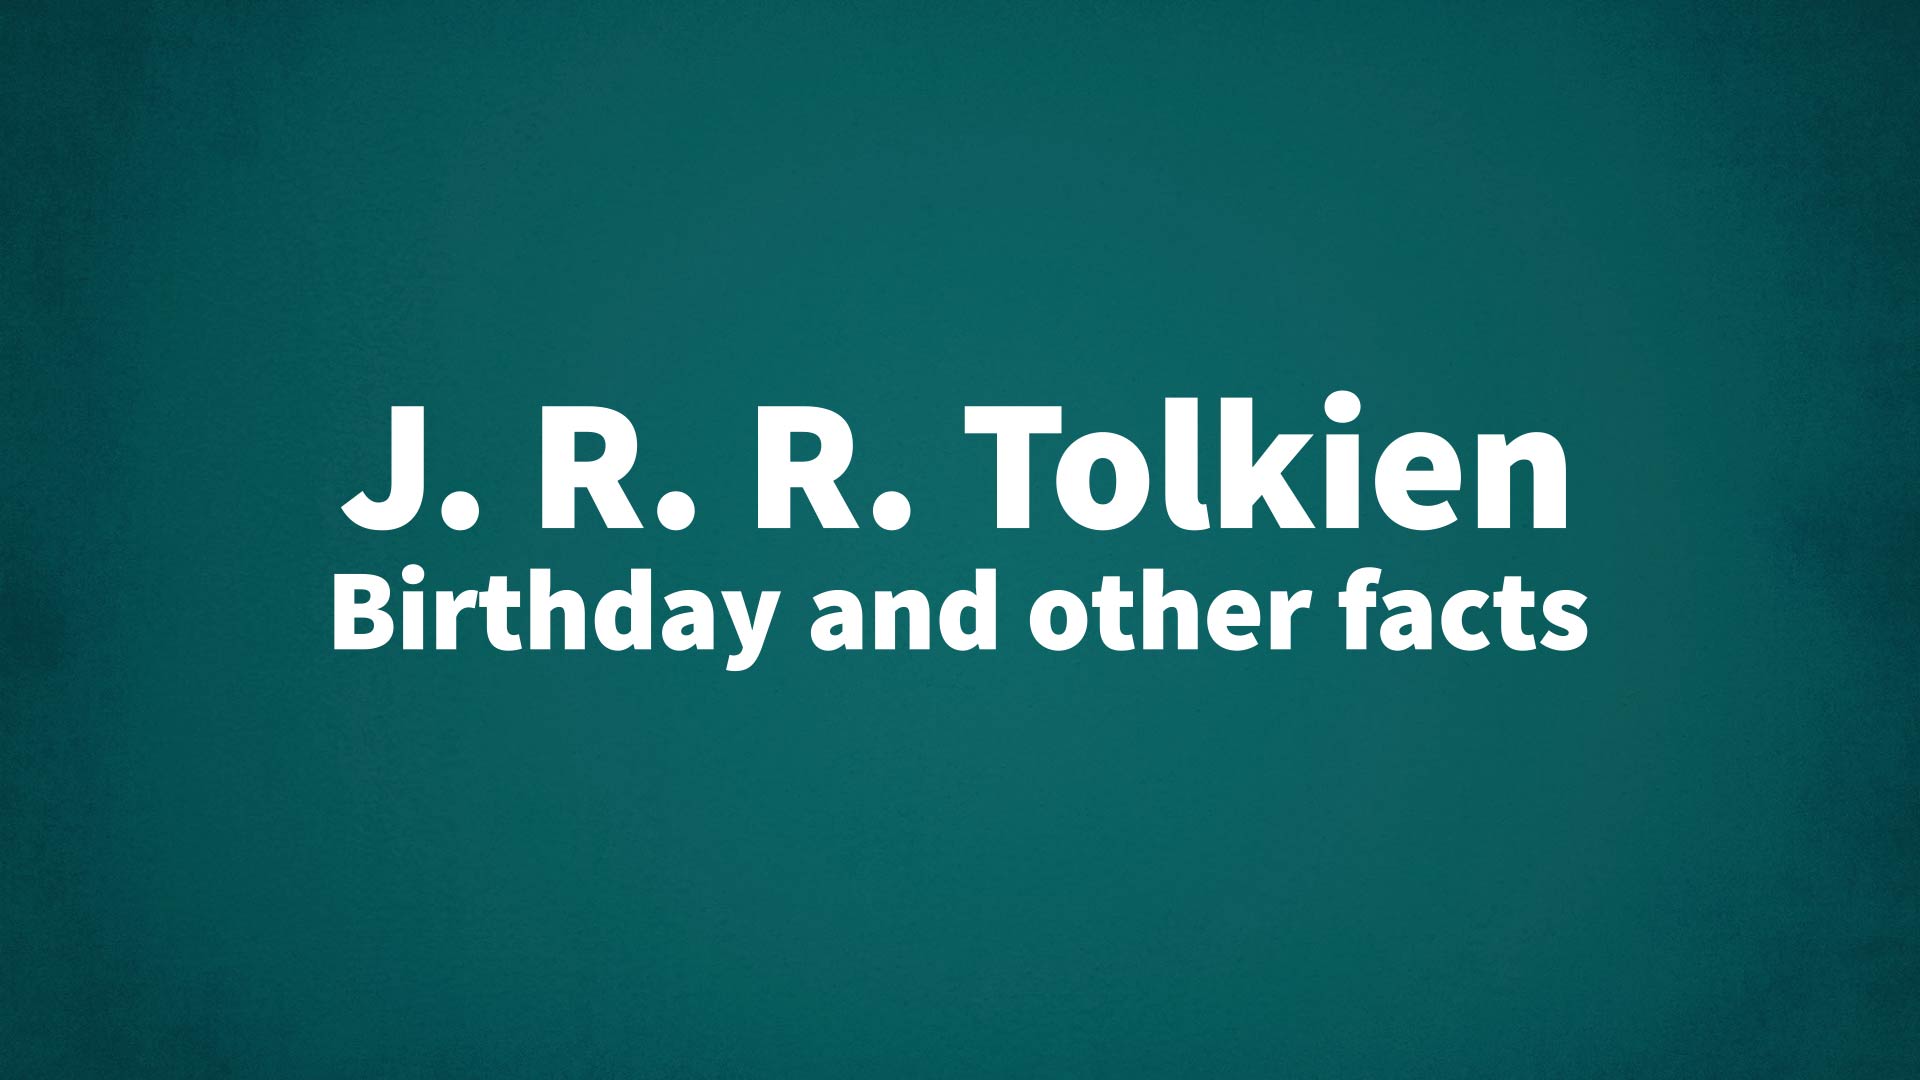 title image for J. R. R. Tolkien birthday